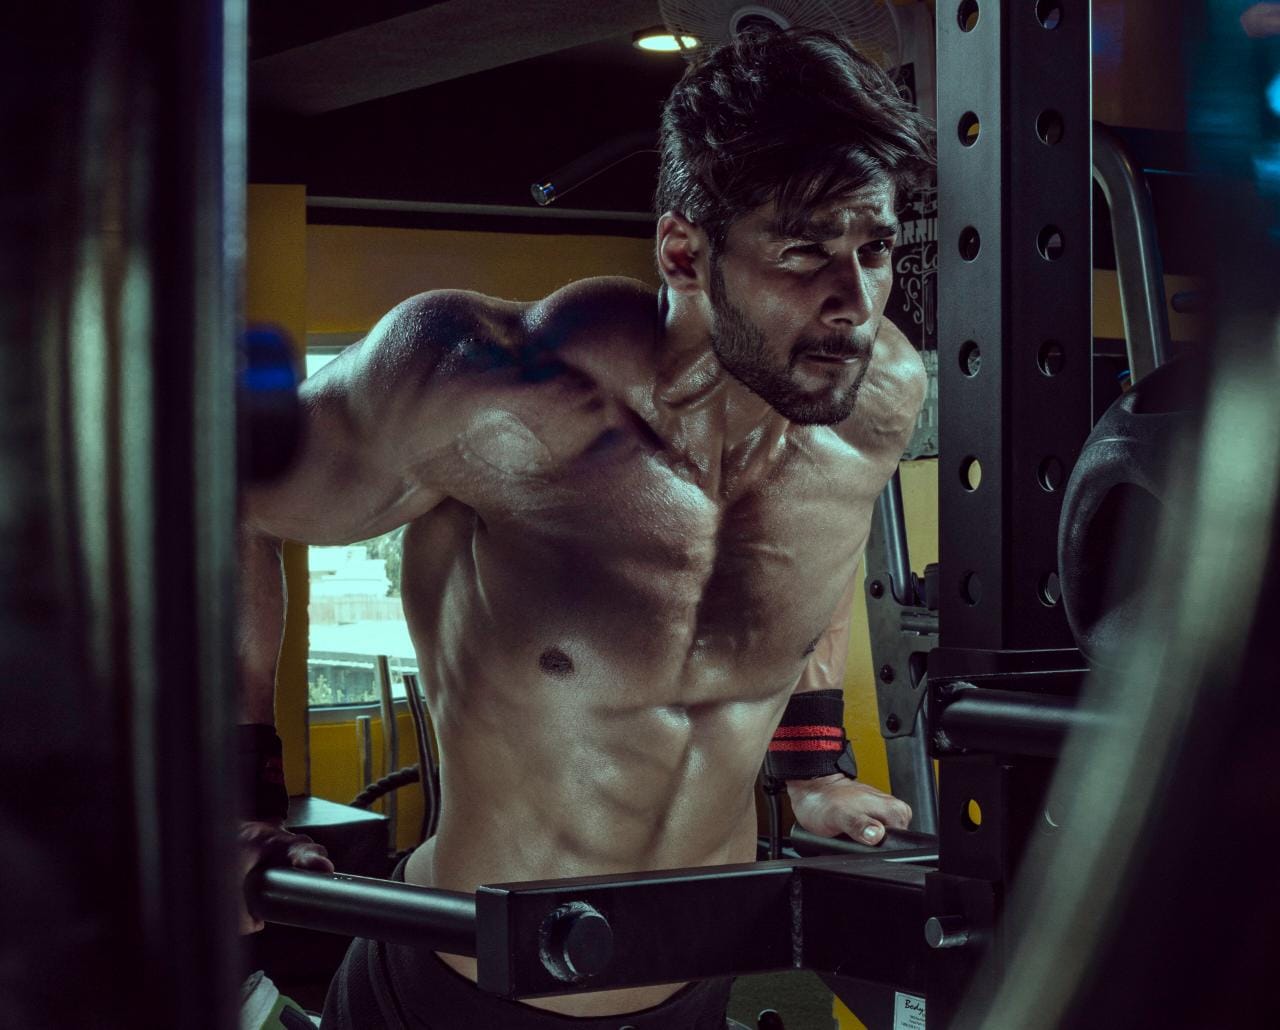 Anas Shahid: The Humble Fitness Trainer